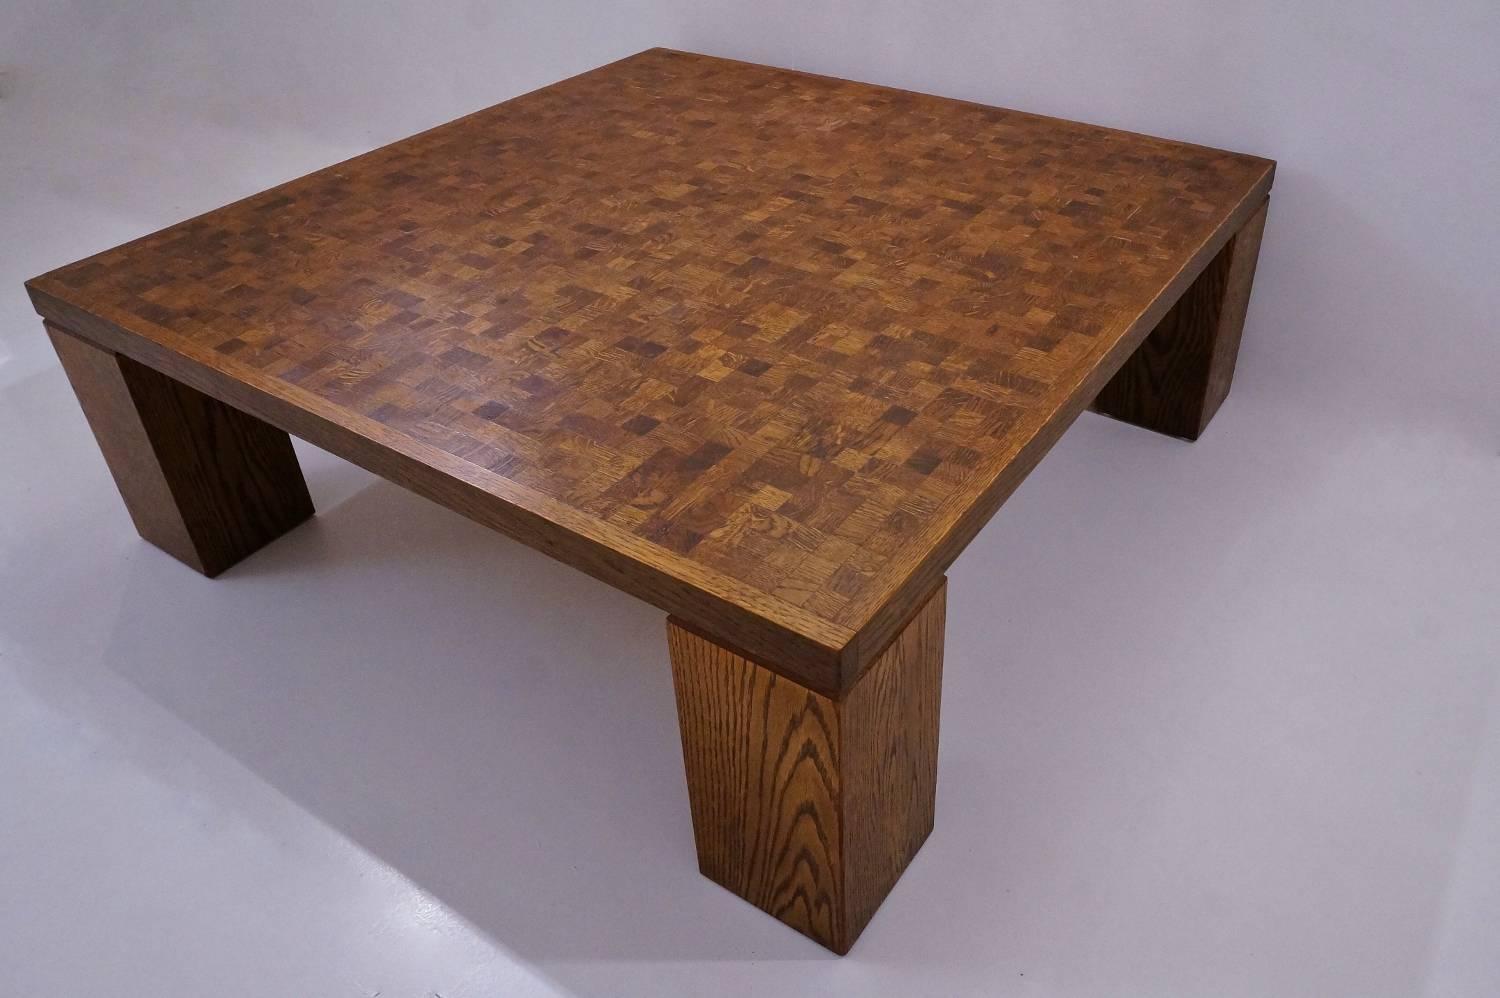 Milo Baughman patchwork coffee table, circa 1970s, American

This table has been lightly cleaned respecting the vintage patina and it is ready to use.

This 1970s patchwork coffee table is in the style of the American designer Milo